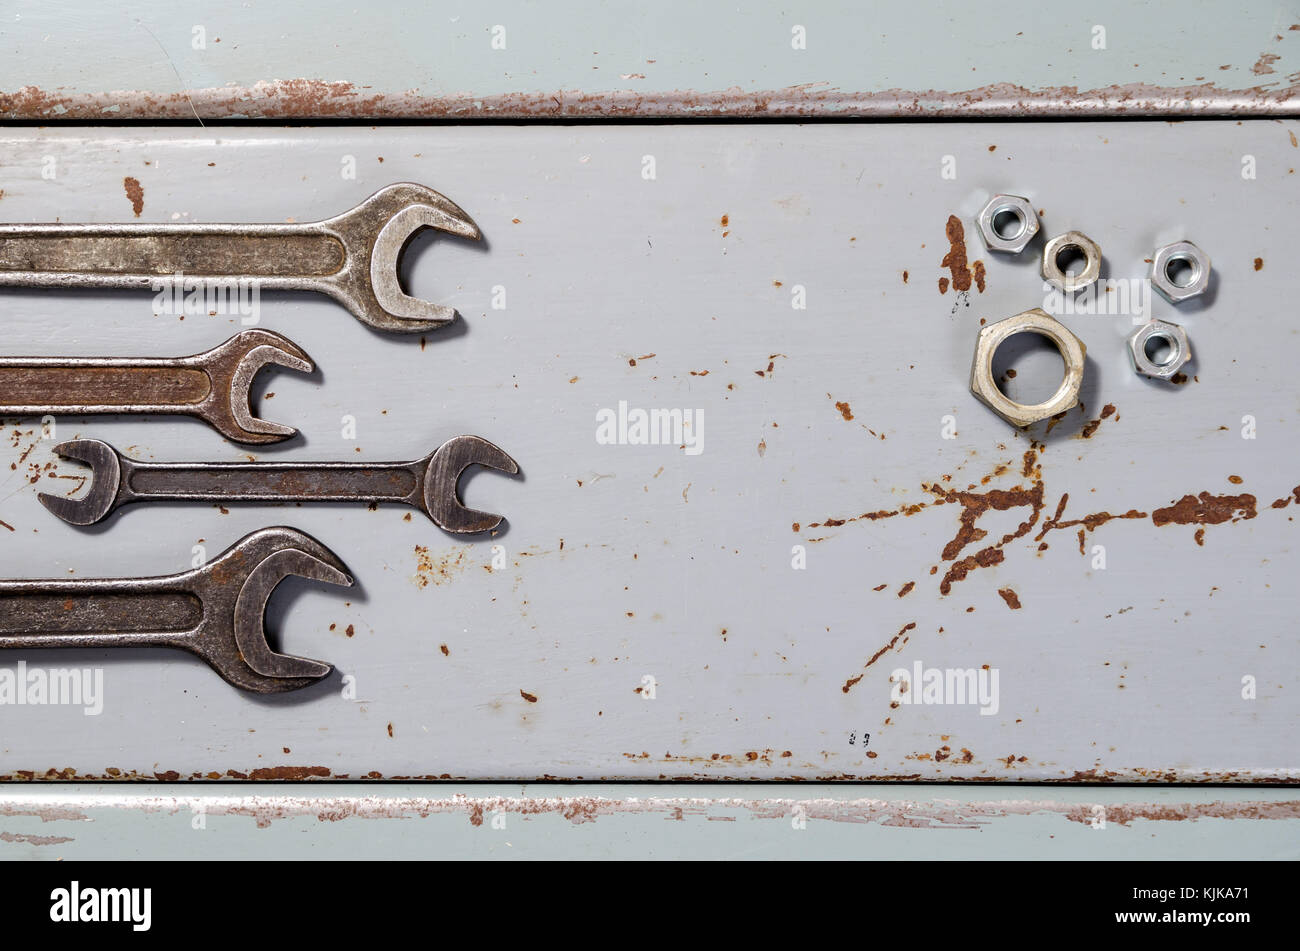 several wrenches and screw-nuts on the painted metal background Stock Photo